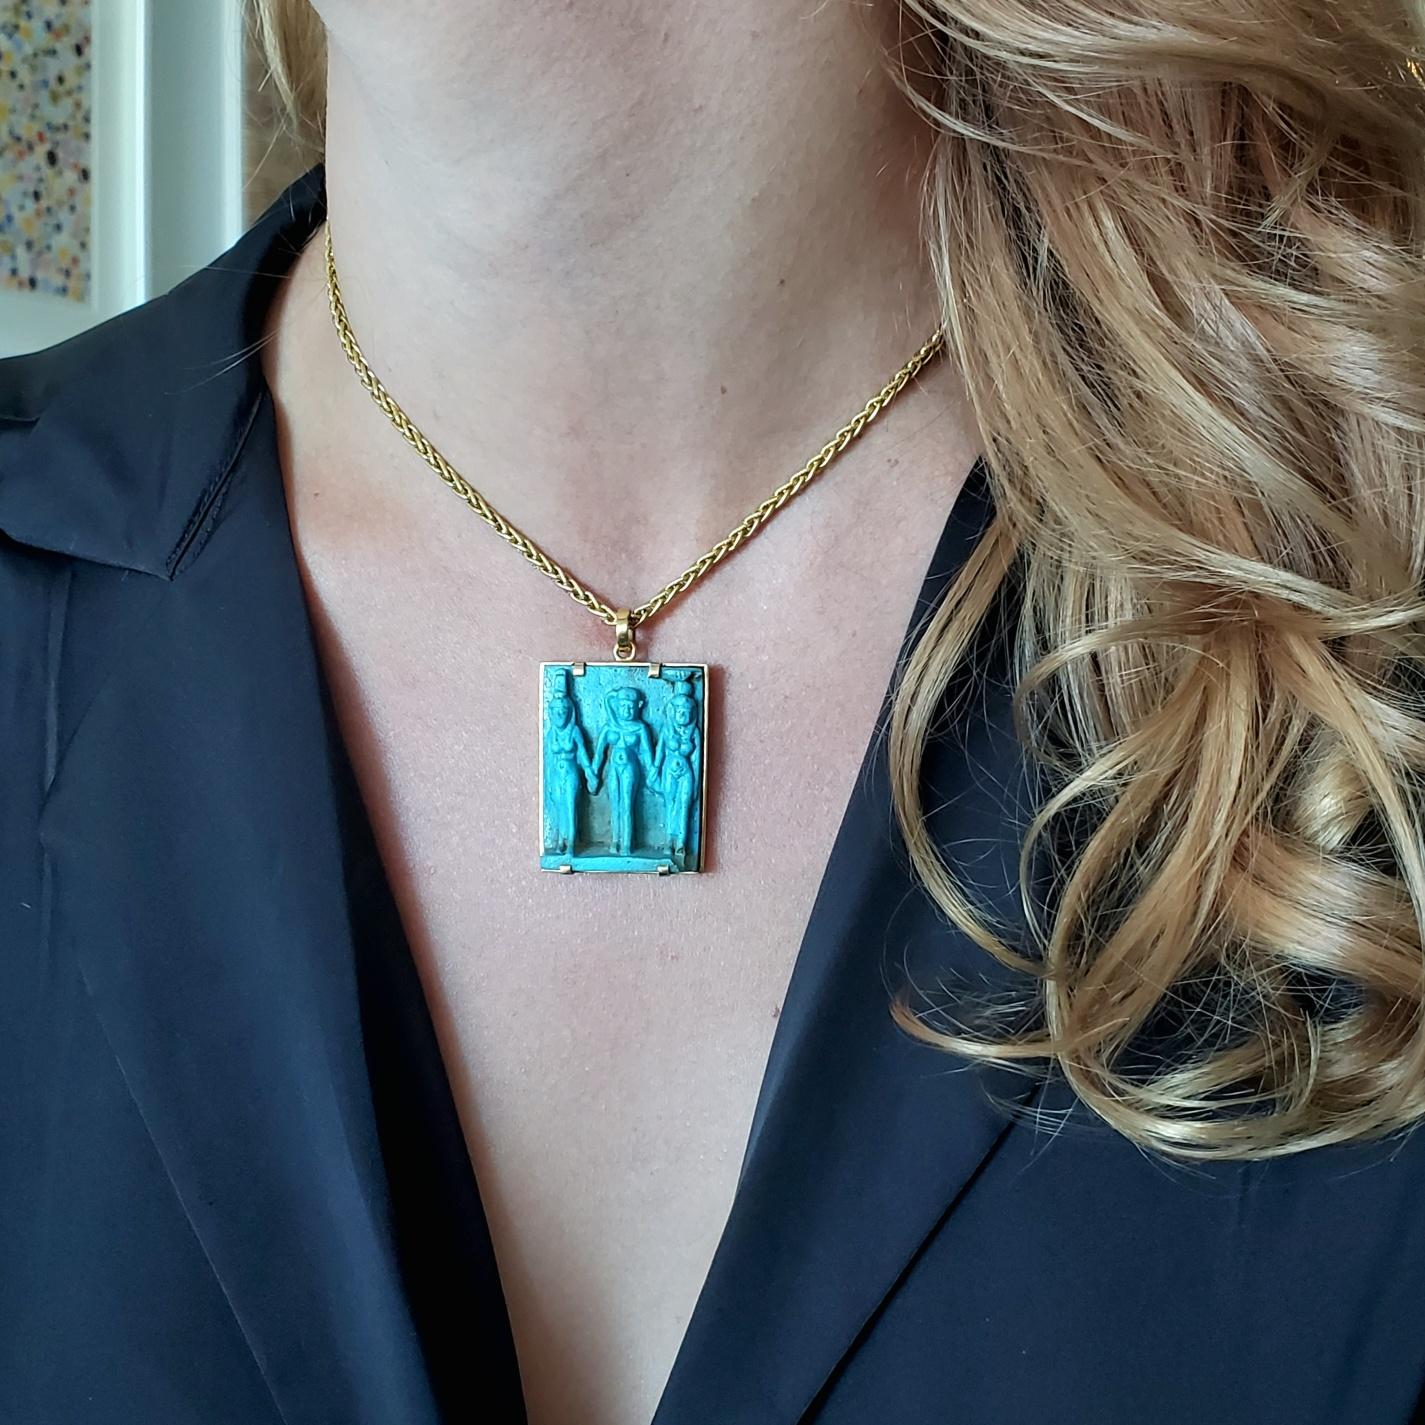 An Egyptian revival pendant with Egypt blue faience.

Beautiful amulet piece from the ancient Egypt, mounted in a squared frame crafted in solid yellow gold of 18 karats with high polished finish. Fitted on top with a movable link to wear in a cold